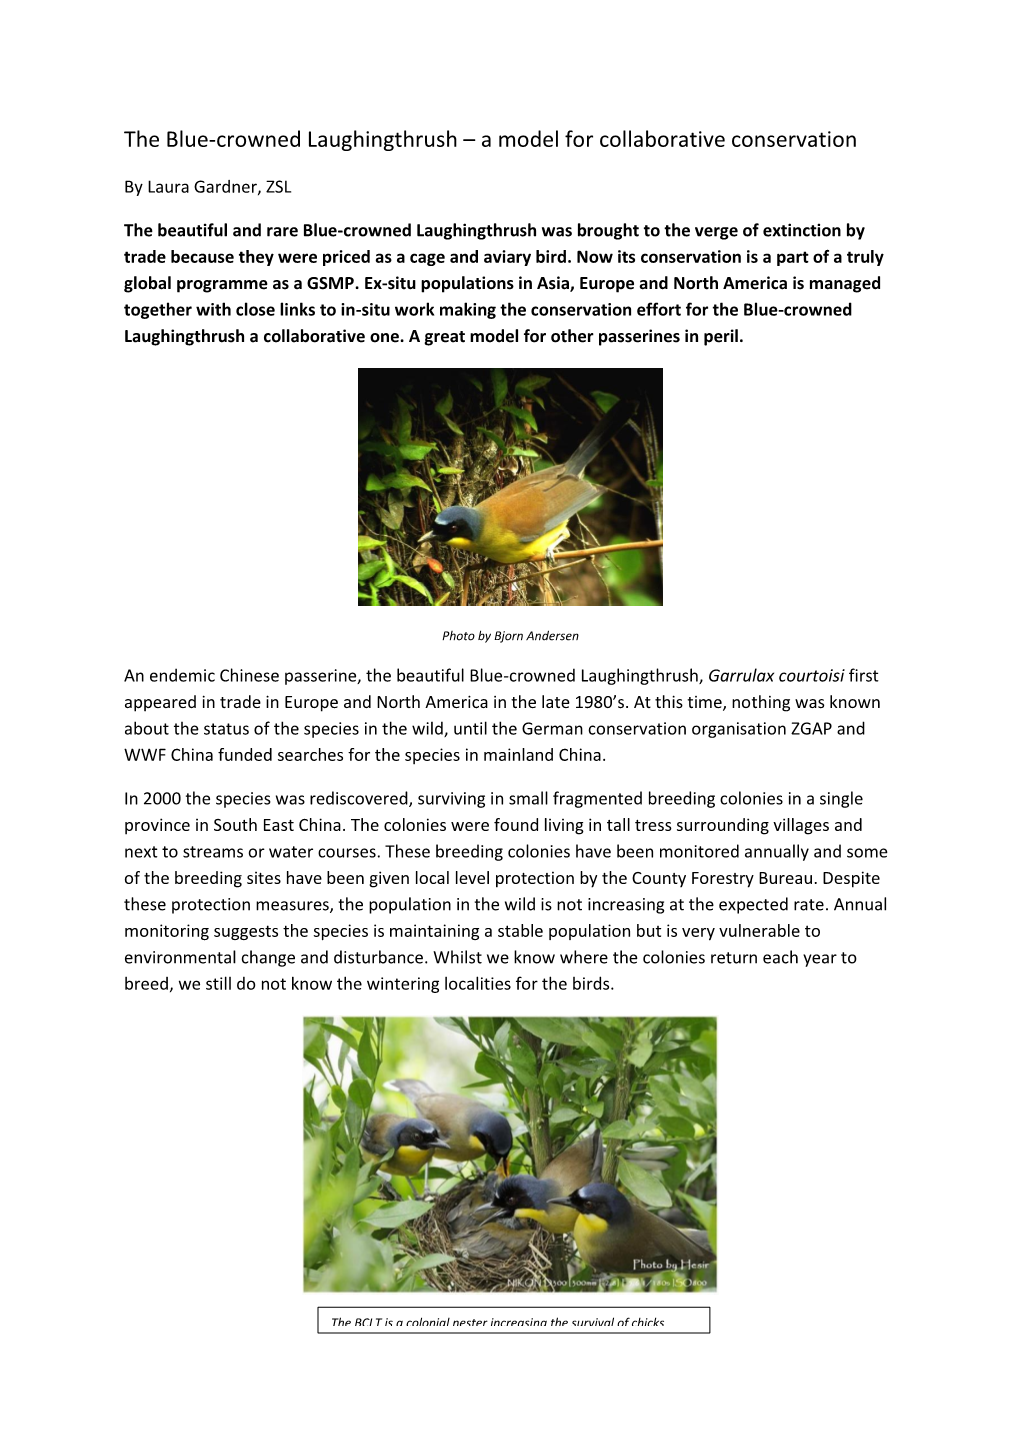 The Blue-Crowned Laughingthrush – a Model for Collaborative Conservation